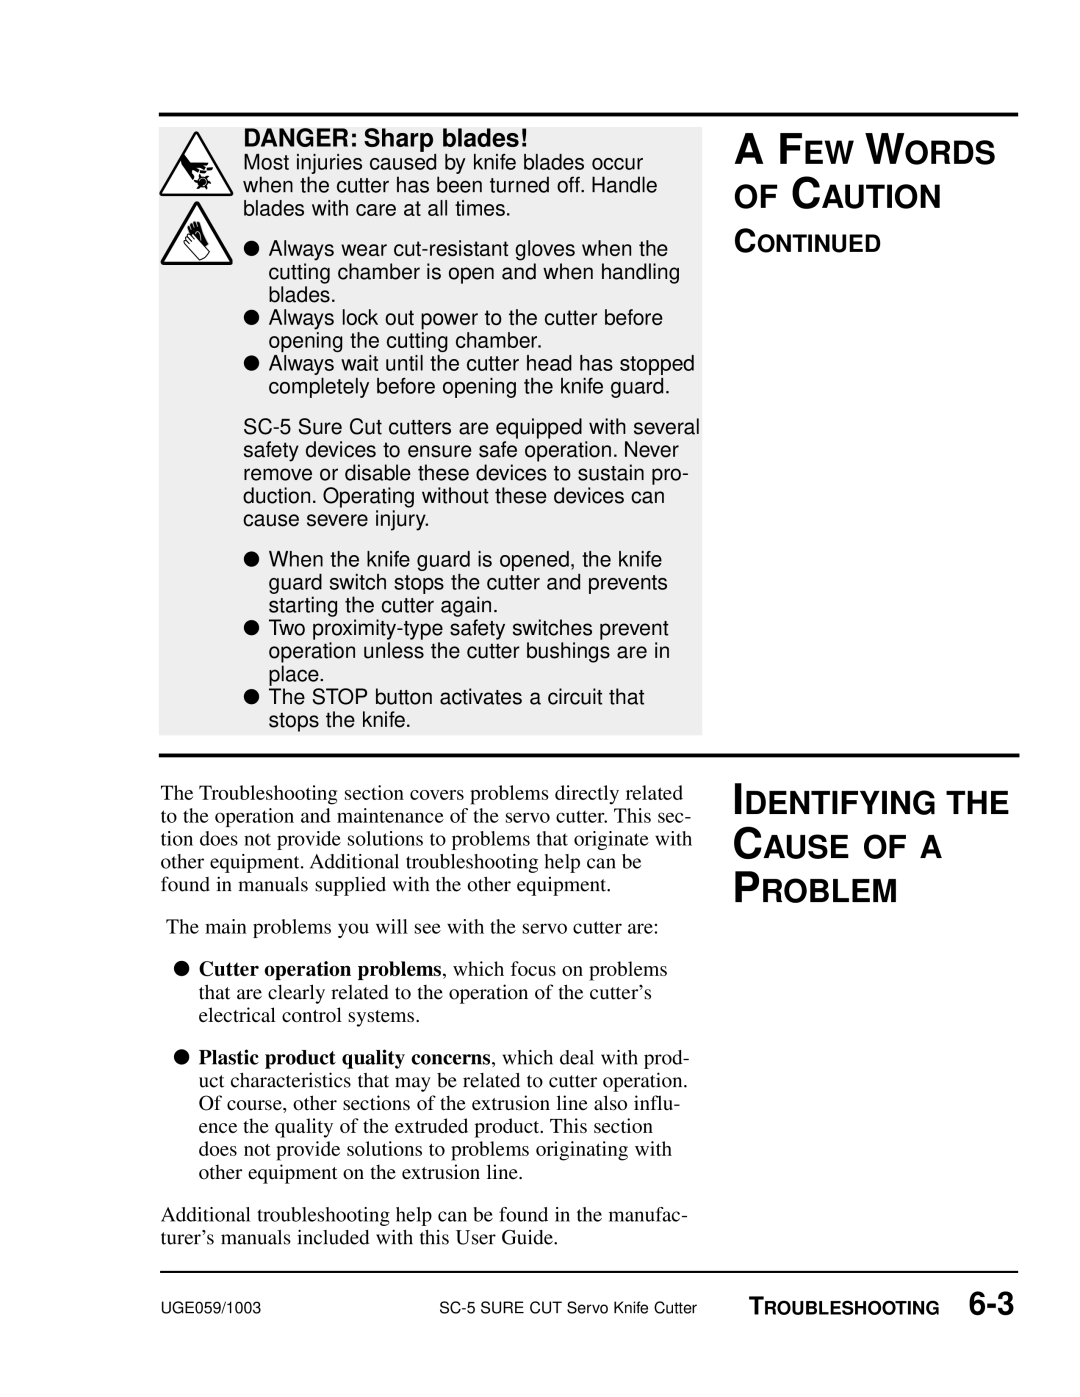 Conair SC-5 manual Identifying The Cause Of A Problem, A Few Words Of Caution, DANGER Sharp blades, Continued 